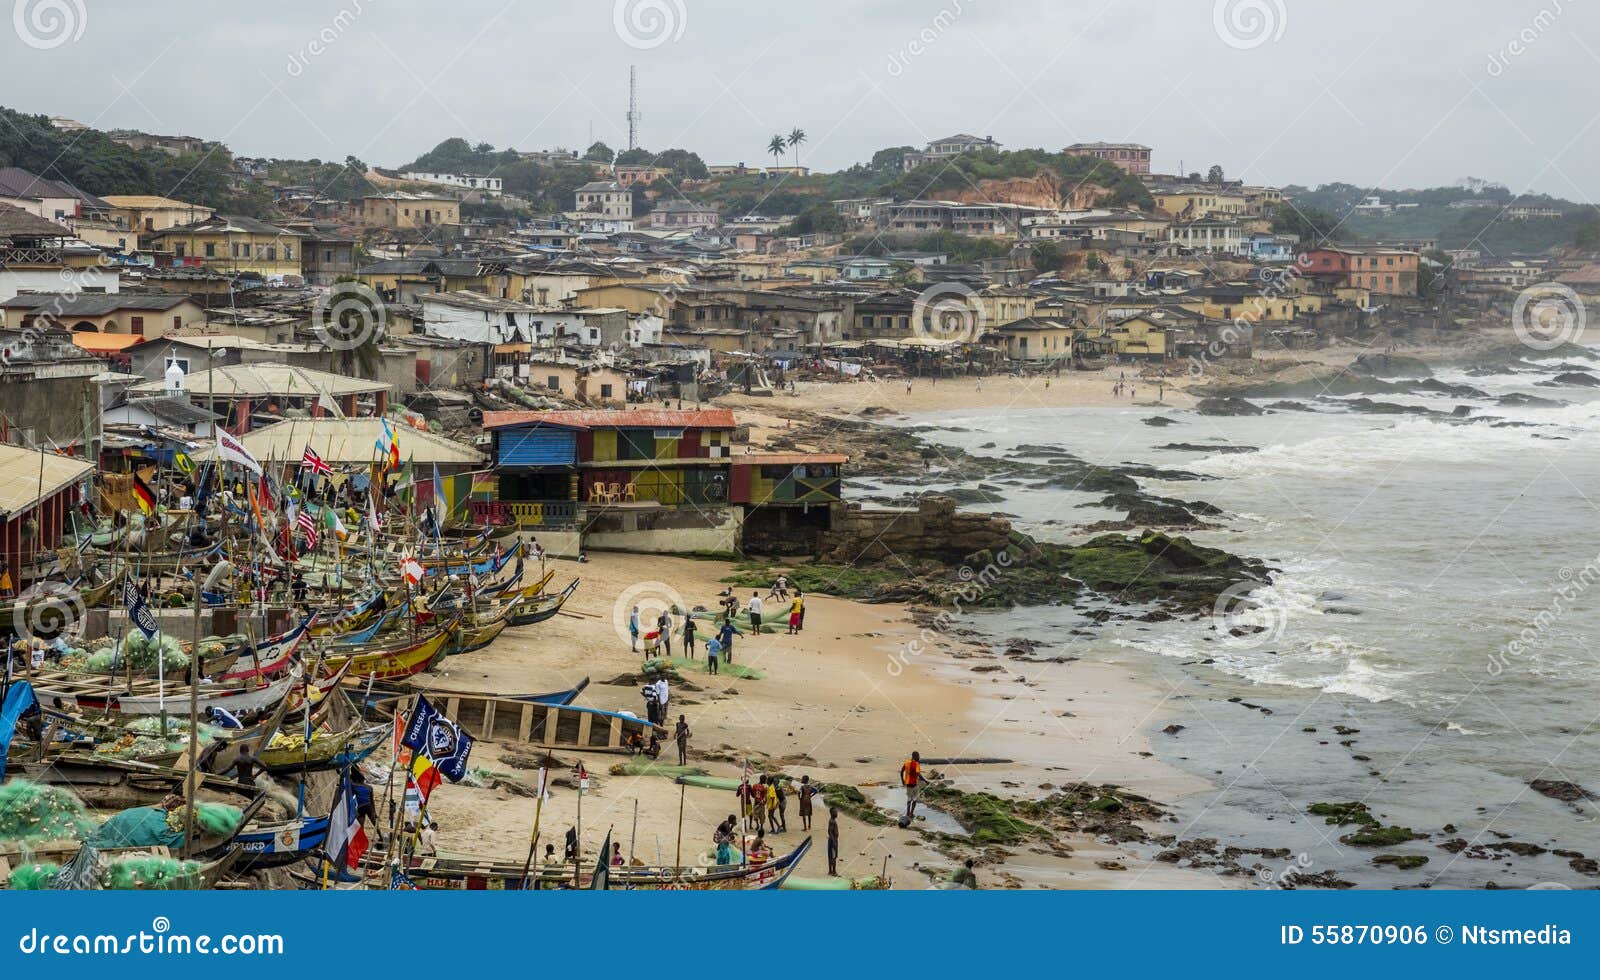 Cape Coast, Ghana - July 31, 2014: Fisherman village in Ghana, near to the Cape Coast. Traditional Ghanian fisherman boats parked at the small bay. Photo was taken from the Cape Coast Castle.